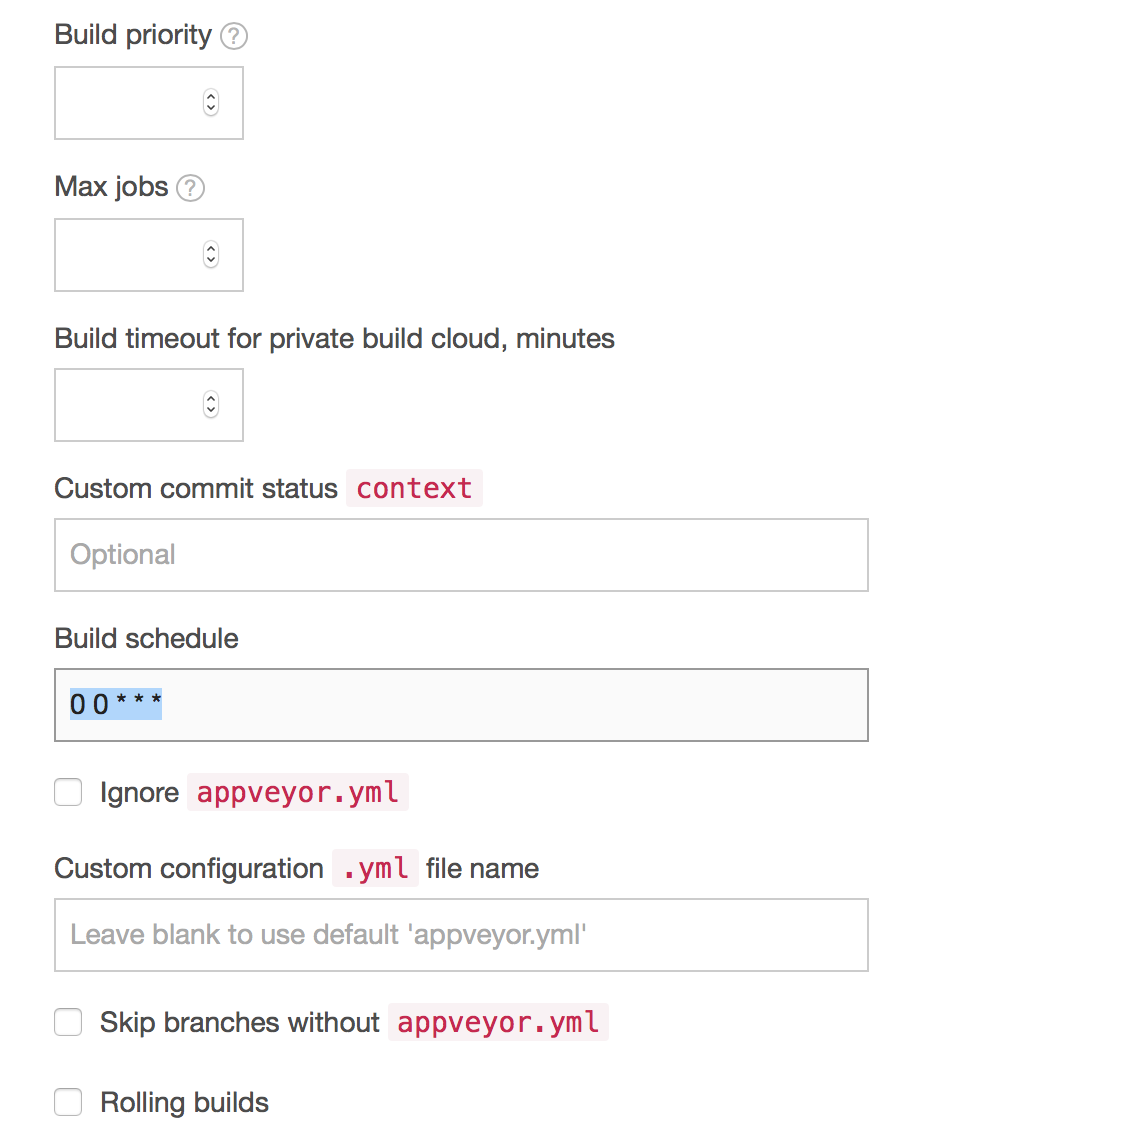 Set AppVeyor Build Schedule once enabled by AppVeyor Support